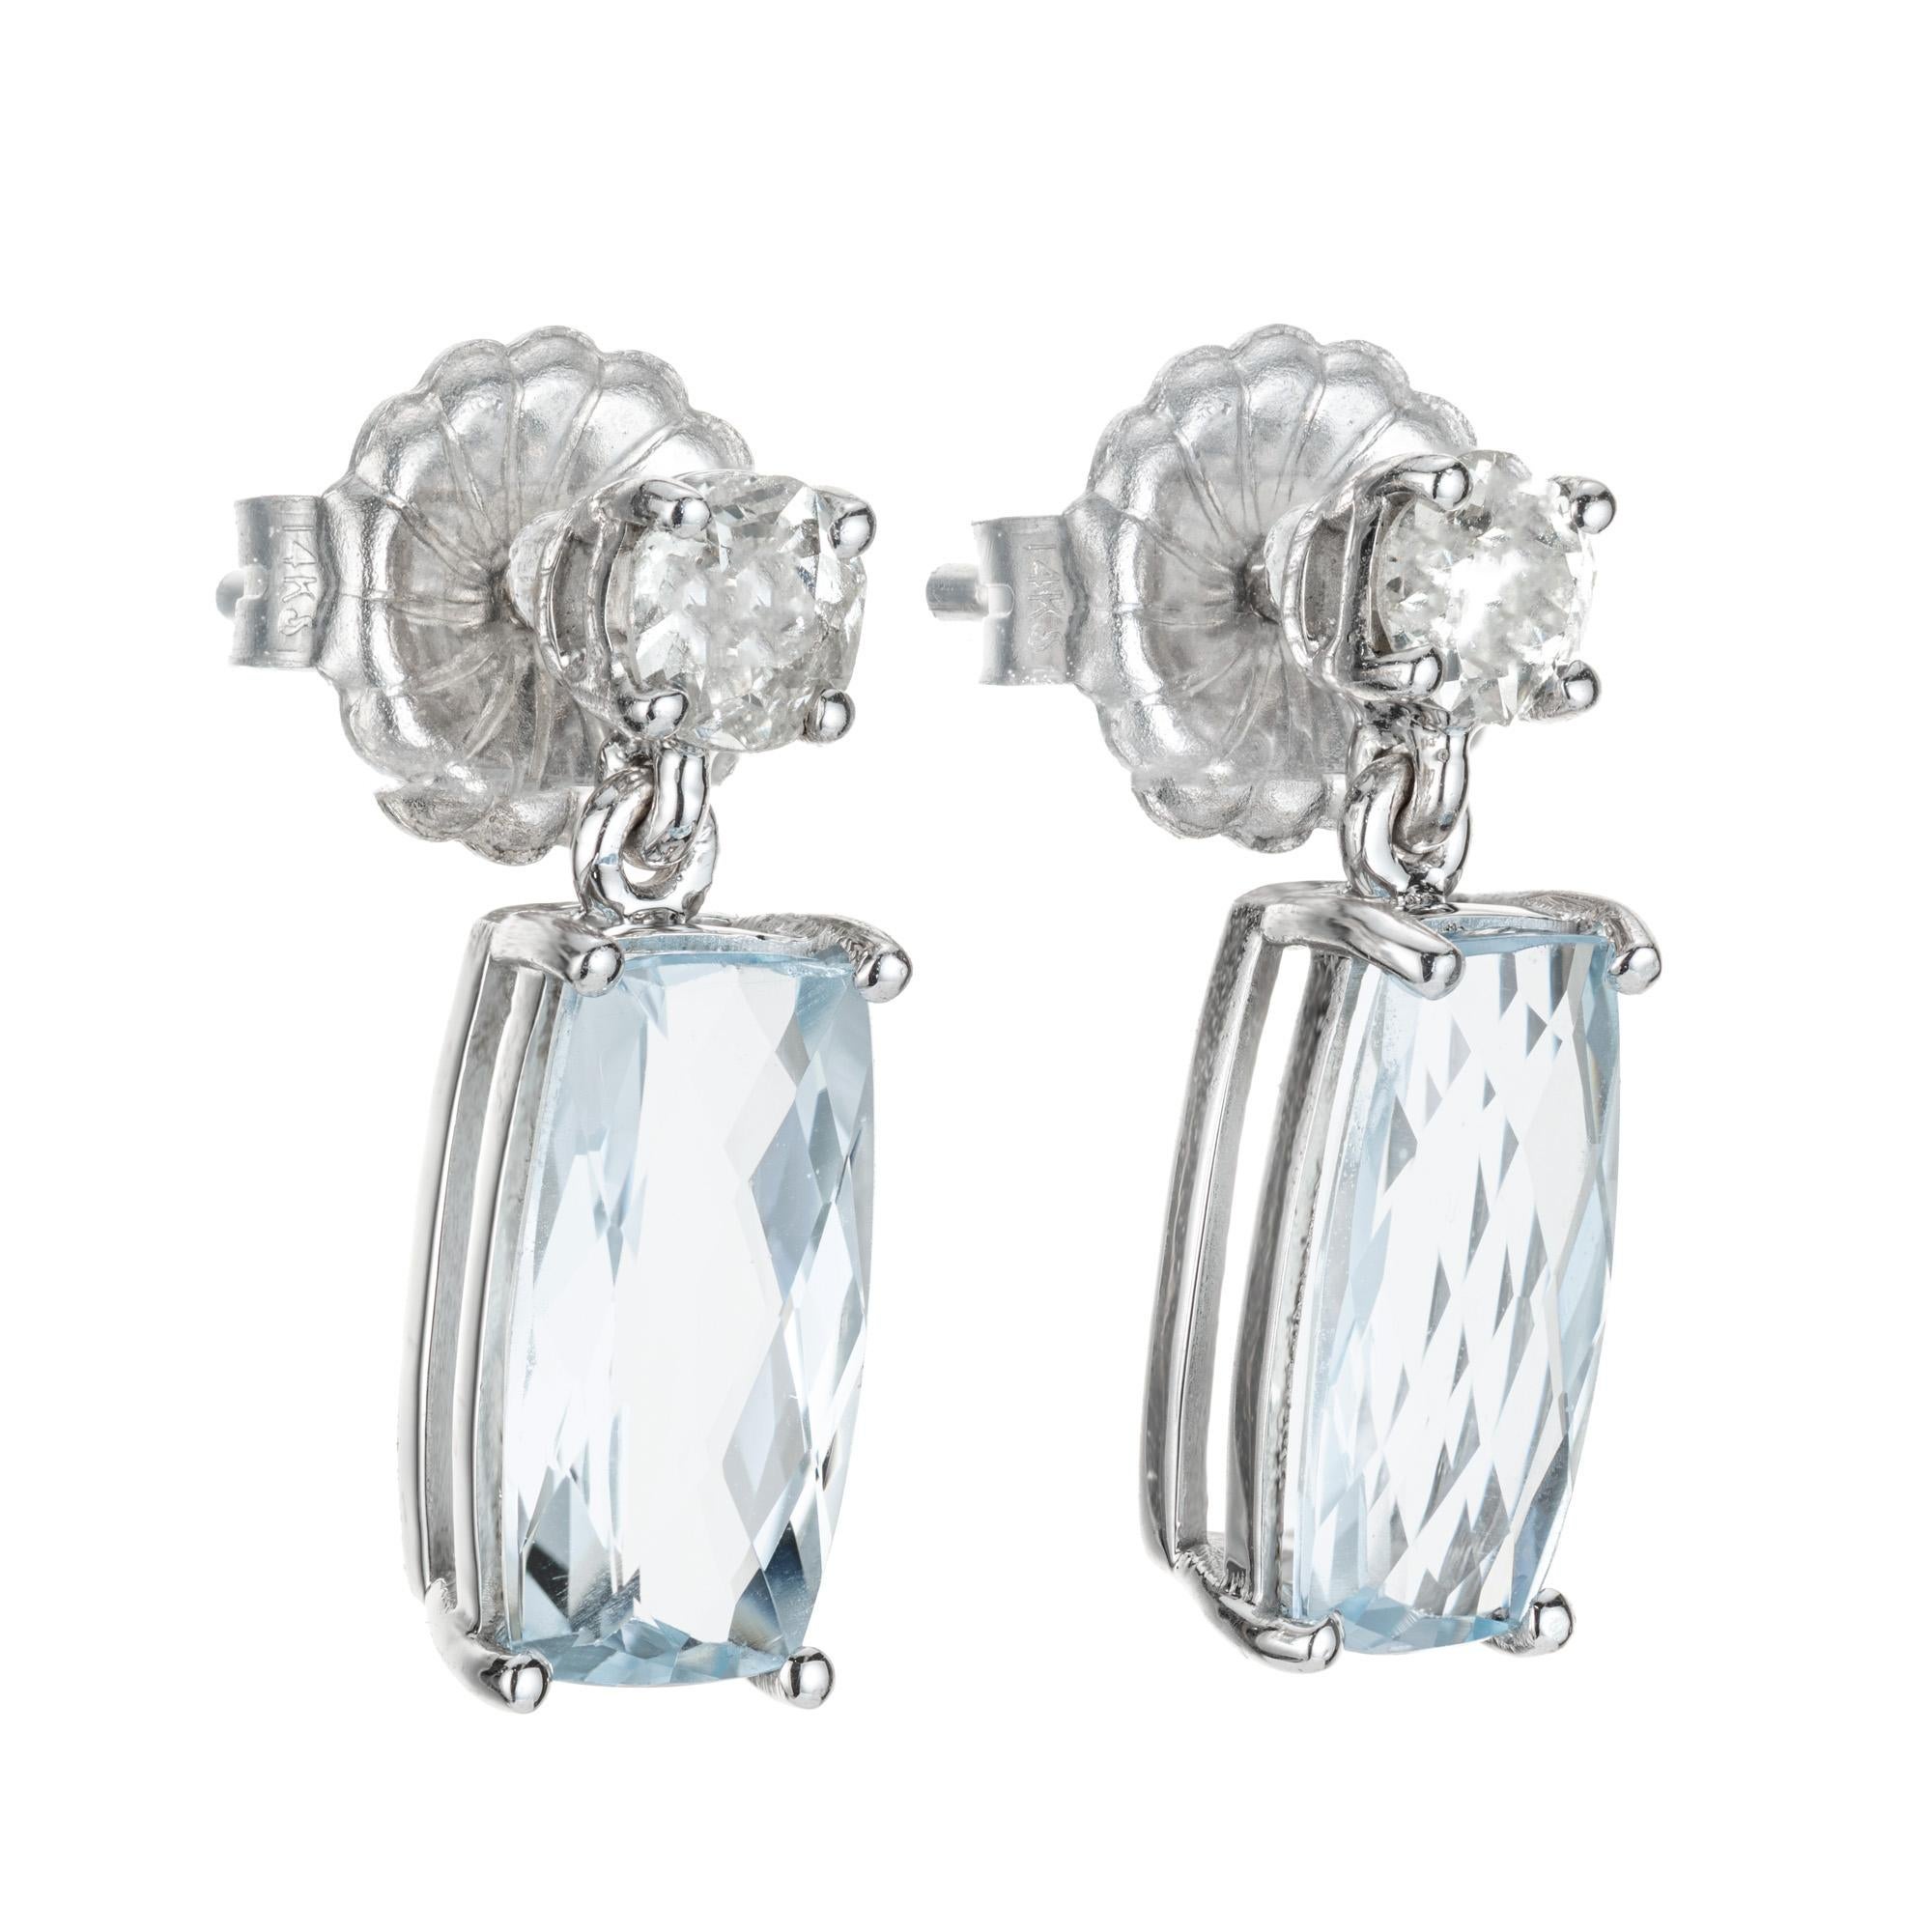 Elongated natural untreated aqua and diamond dangle earrings. 3.24ct elongated cushion cut aquamarines with 2 round old mine cut top diamonds. The stones are circa early 1900's. Designed and crafted in the Peter Suchy workshop

2 elongated cushion